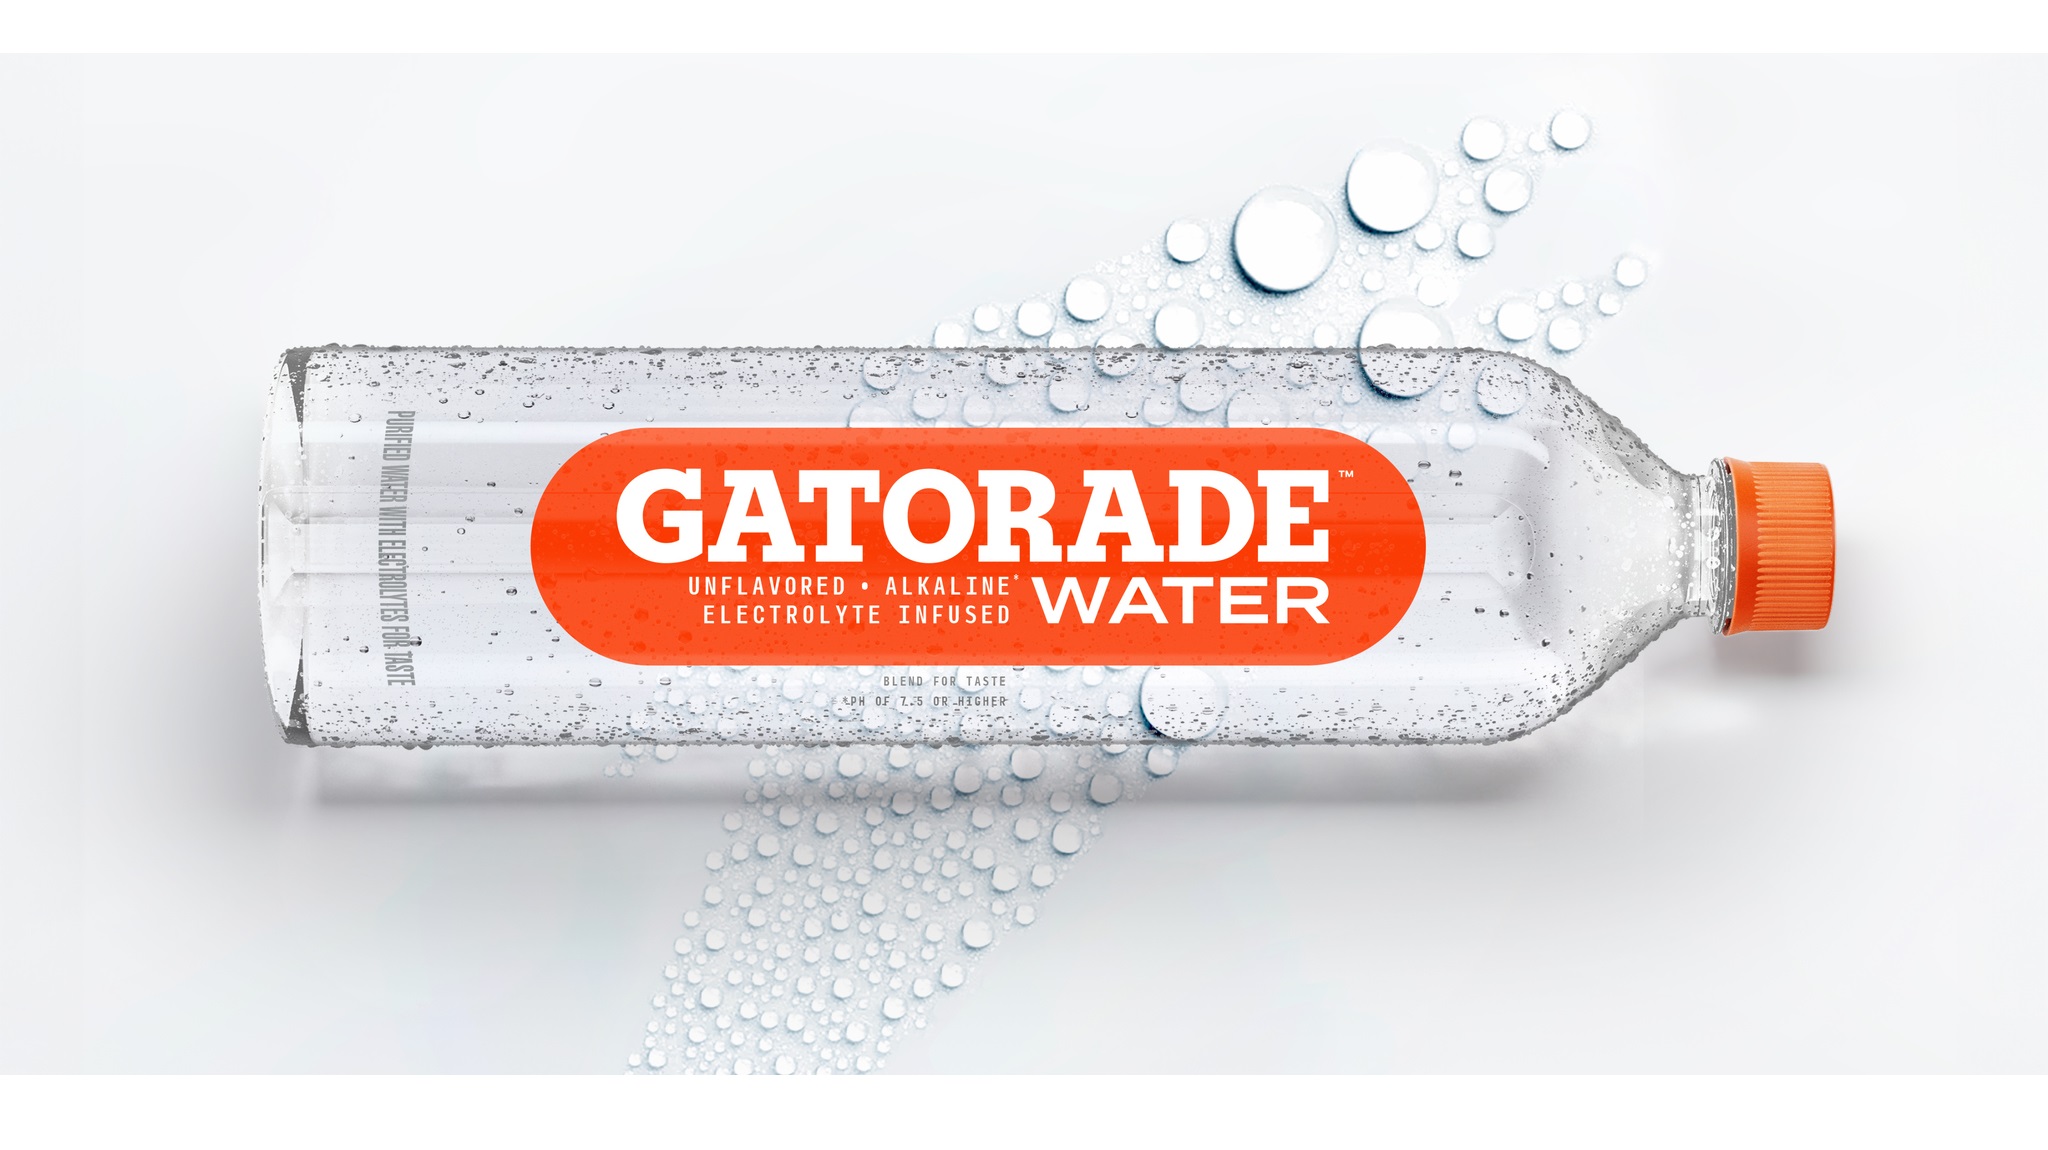 https://www.beveragedaily.com/var/wrbm_gb_food_pharma/storage/images/publications/food-beverage-nutrition/beveragedaily.com/article/2023/09/07/gatorade-water-set-to-launch-in-2024-for-all-day-hydration/16725749-1-eng-GB/Gatorade-Water-set-to-launch-in-2024-for-all-day-hydration.jpg